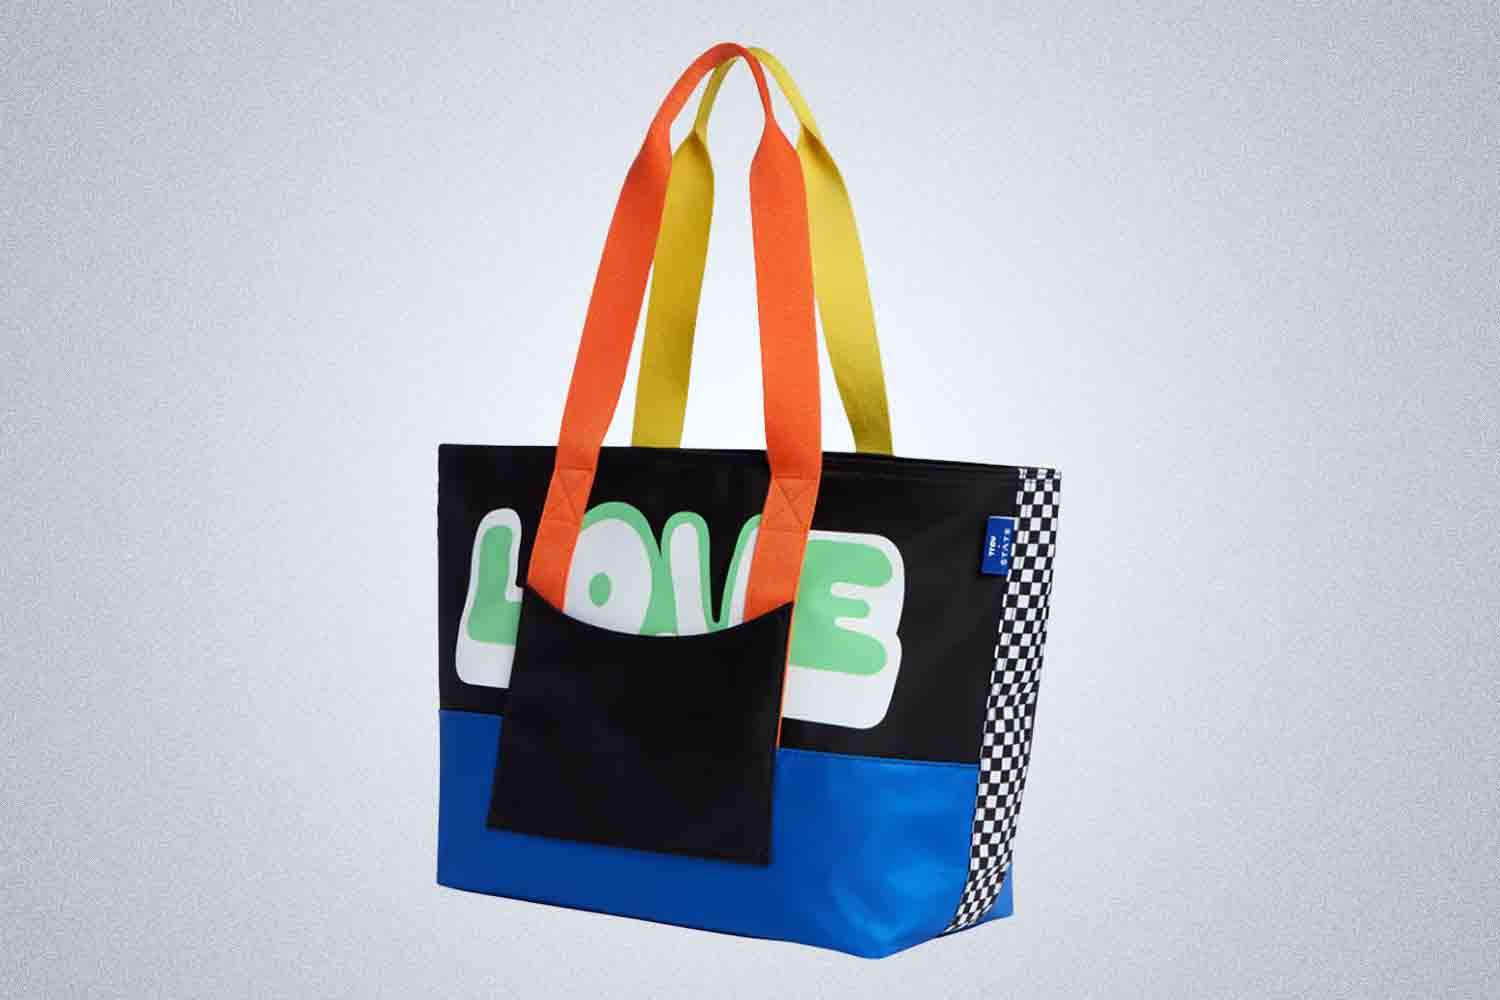 a multi-colored tote bag from STATE on a grey background